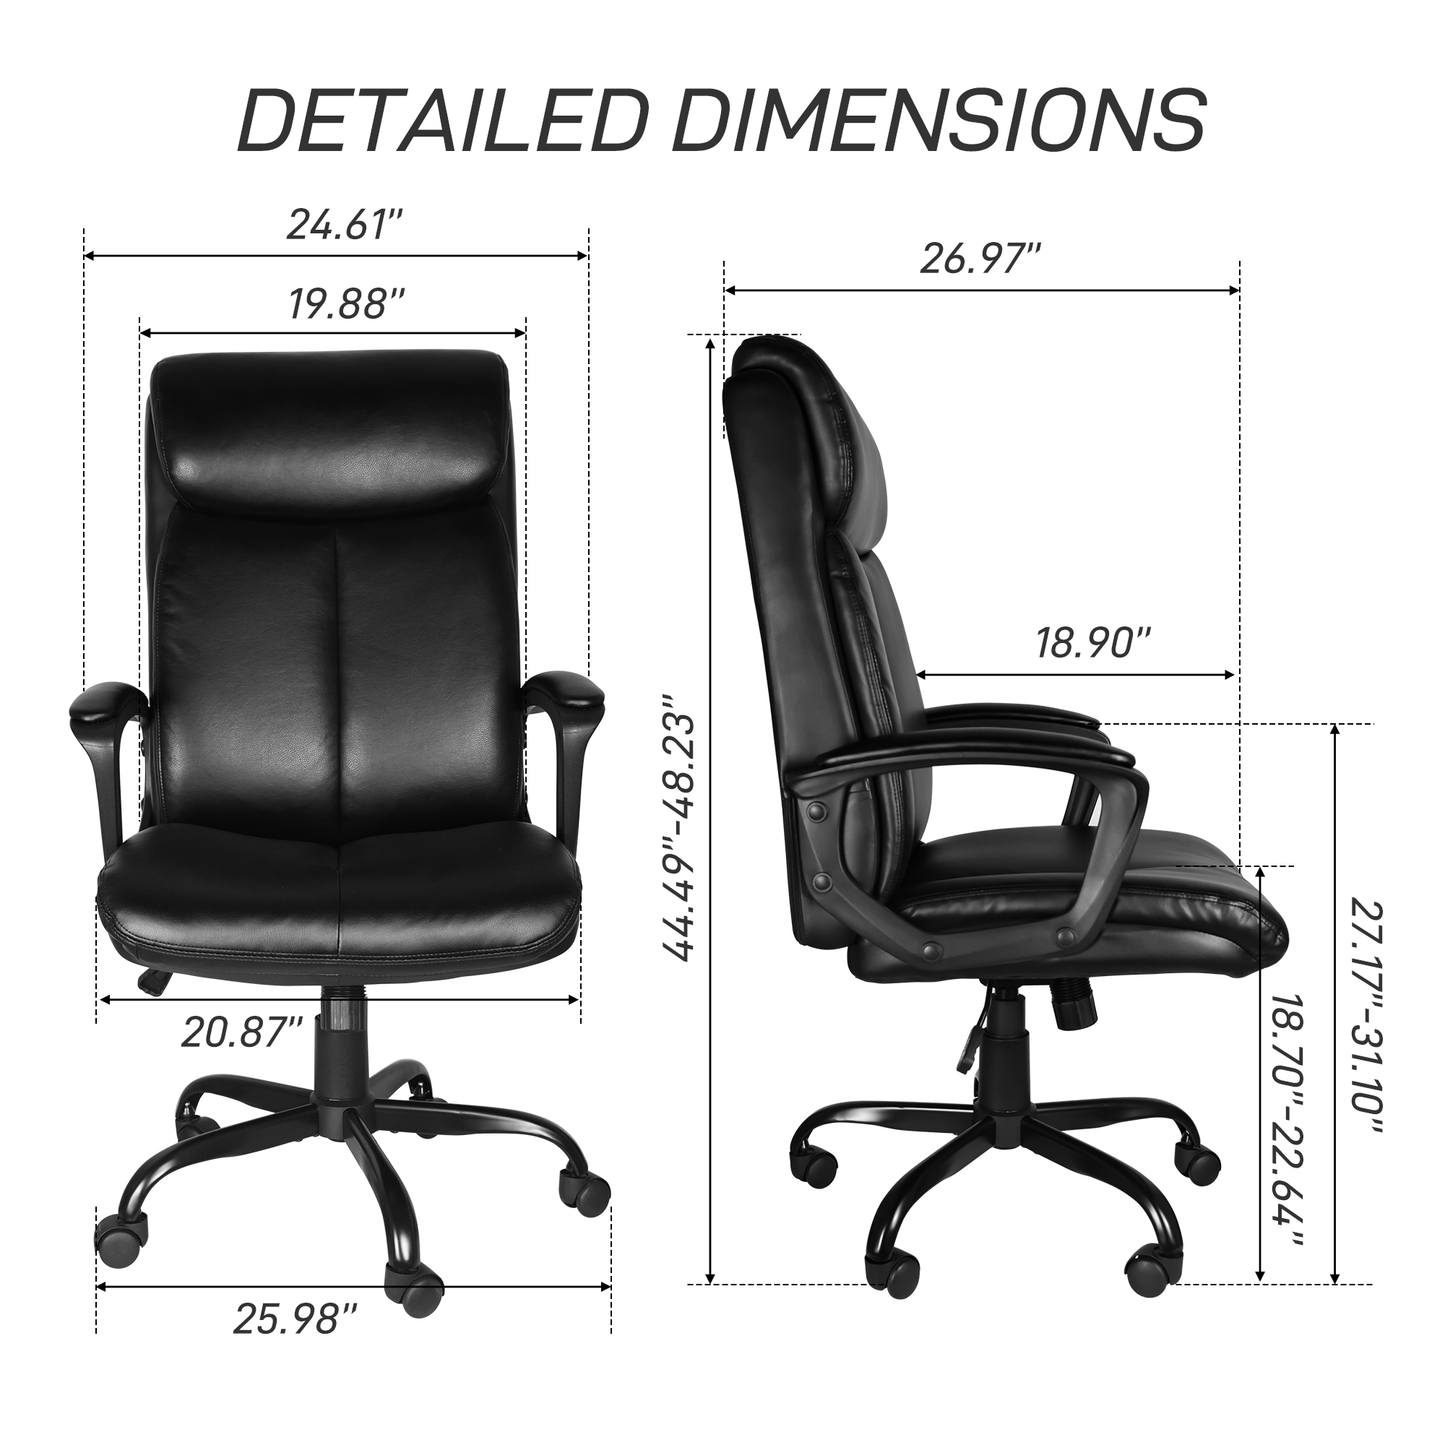 Free Shipping soft Padded Mid-Back Office Computer Desk Chair with Armrest; Leather office Chair ; PU faux leather;  till function 90-110 degree; black color max uploaded 300LBS